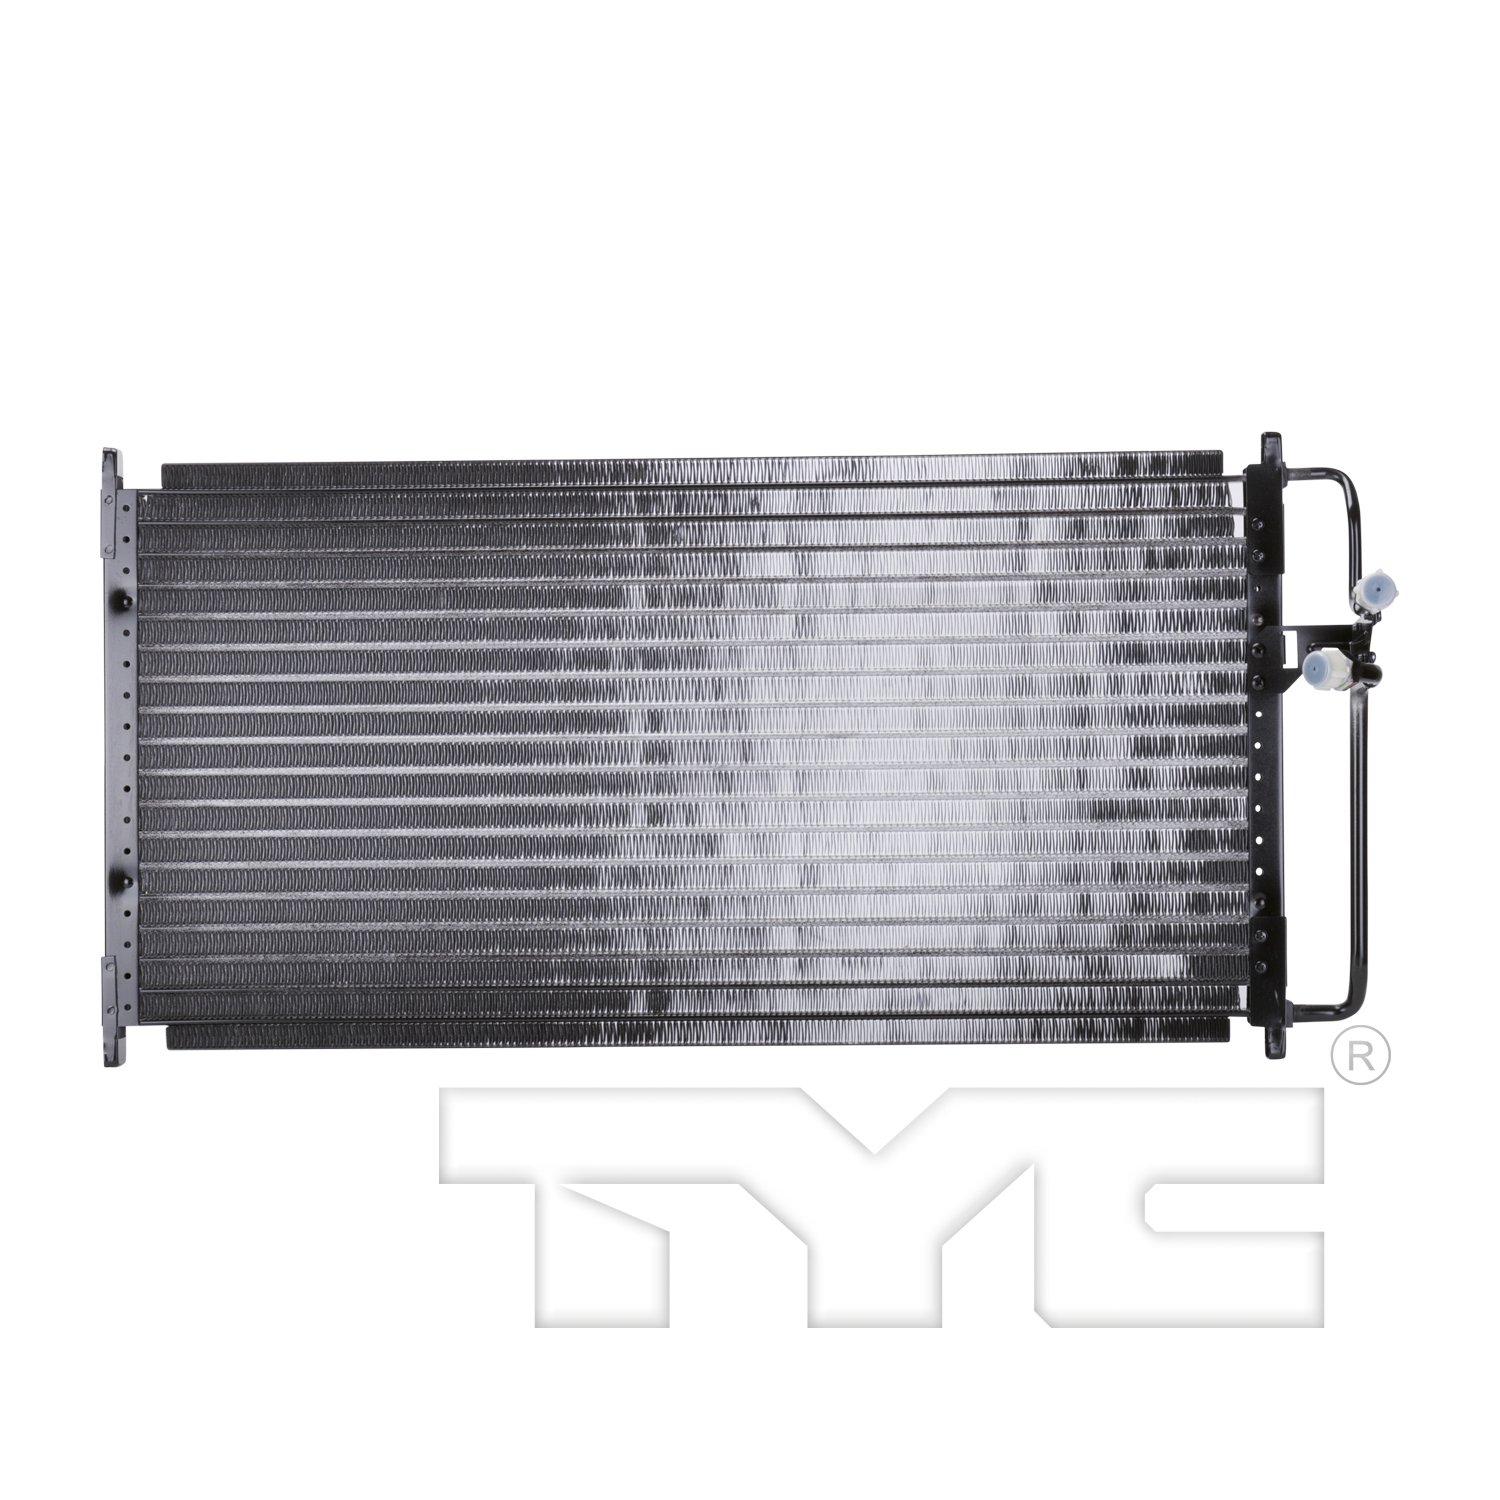 Aftermarket AC CONDENSERS for OLDSMOBILE - CUTLASS SUPREME, CUTLASS SUPREME,94-96,Air conditioning condenser